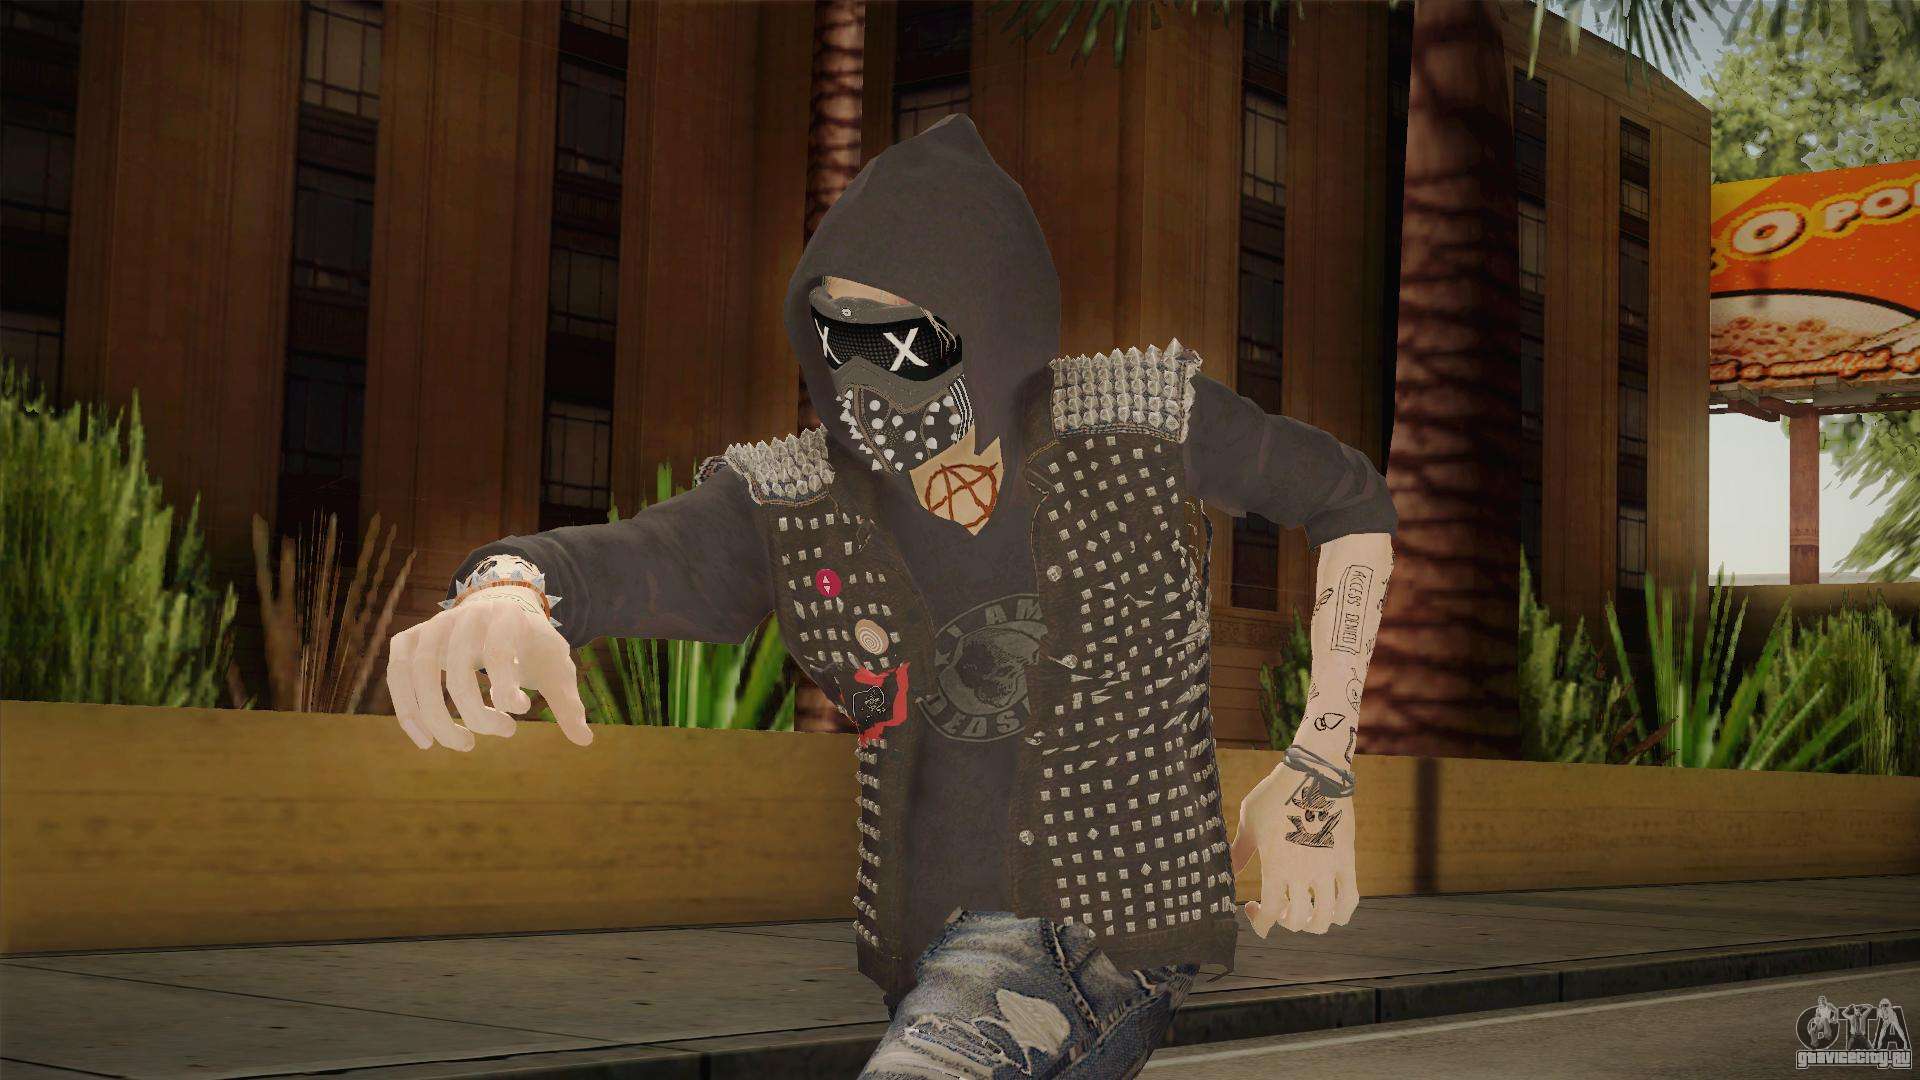 watch dogs 2 wrench